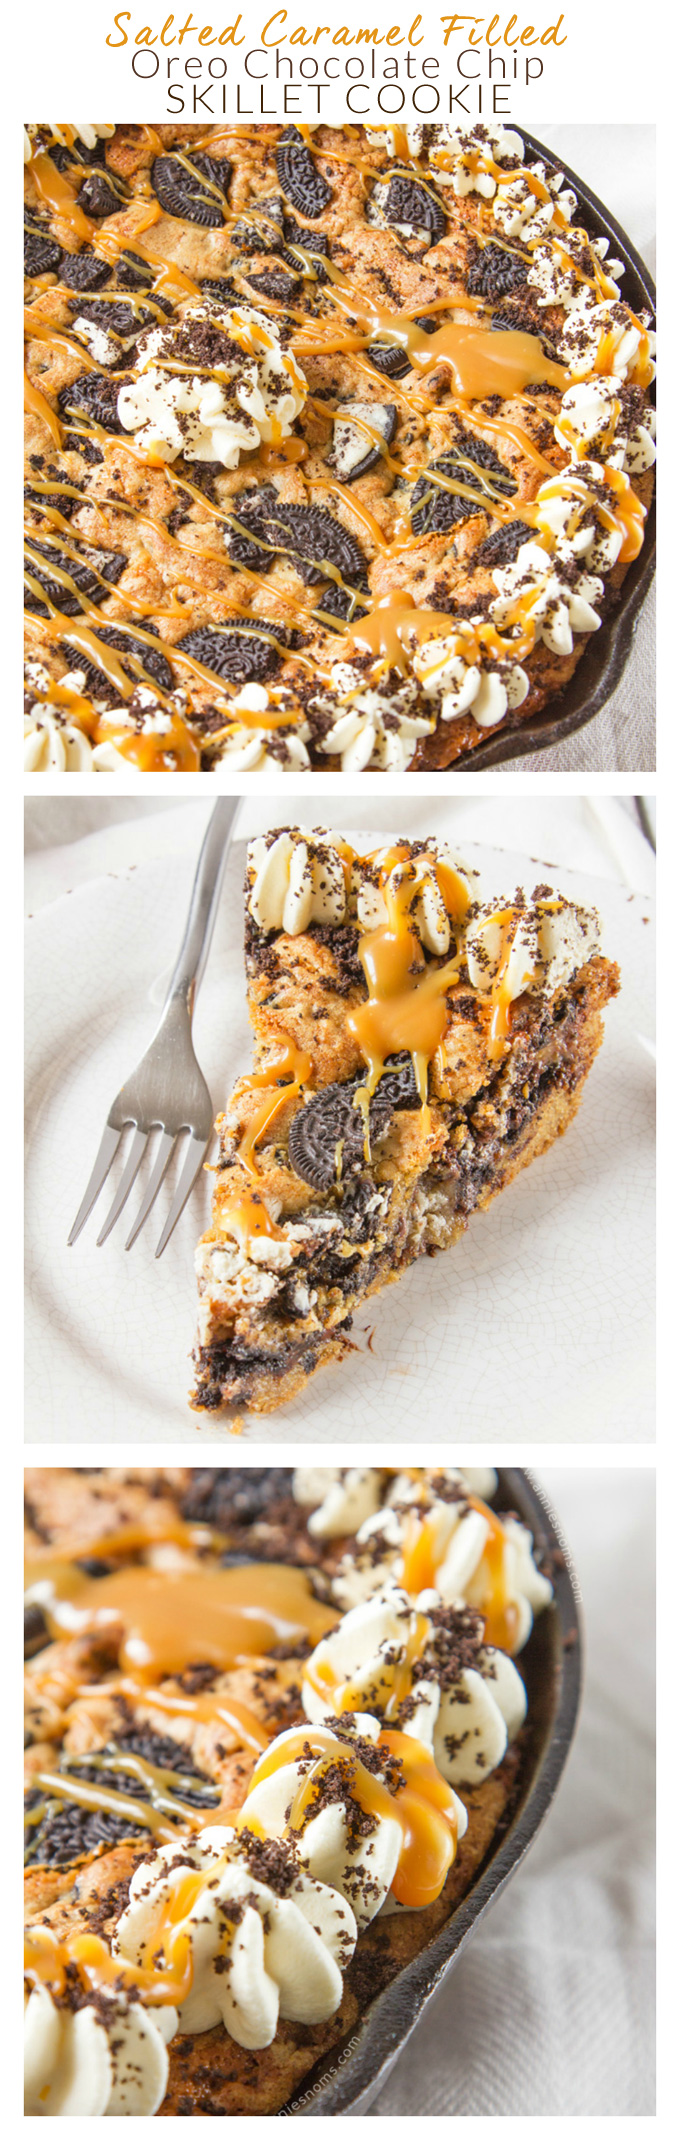 Oreo and chocolate chip stuffed cookie dough with an oozing middle of salted caramel sauce and a topping of more cookie dough and Oreo's. Bake it up and you will have a gooey, golden, rich, sweet and salty dessert which tastes like pure heaven. #ad